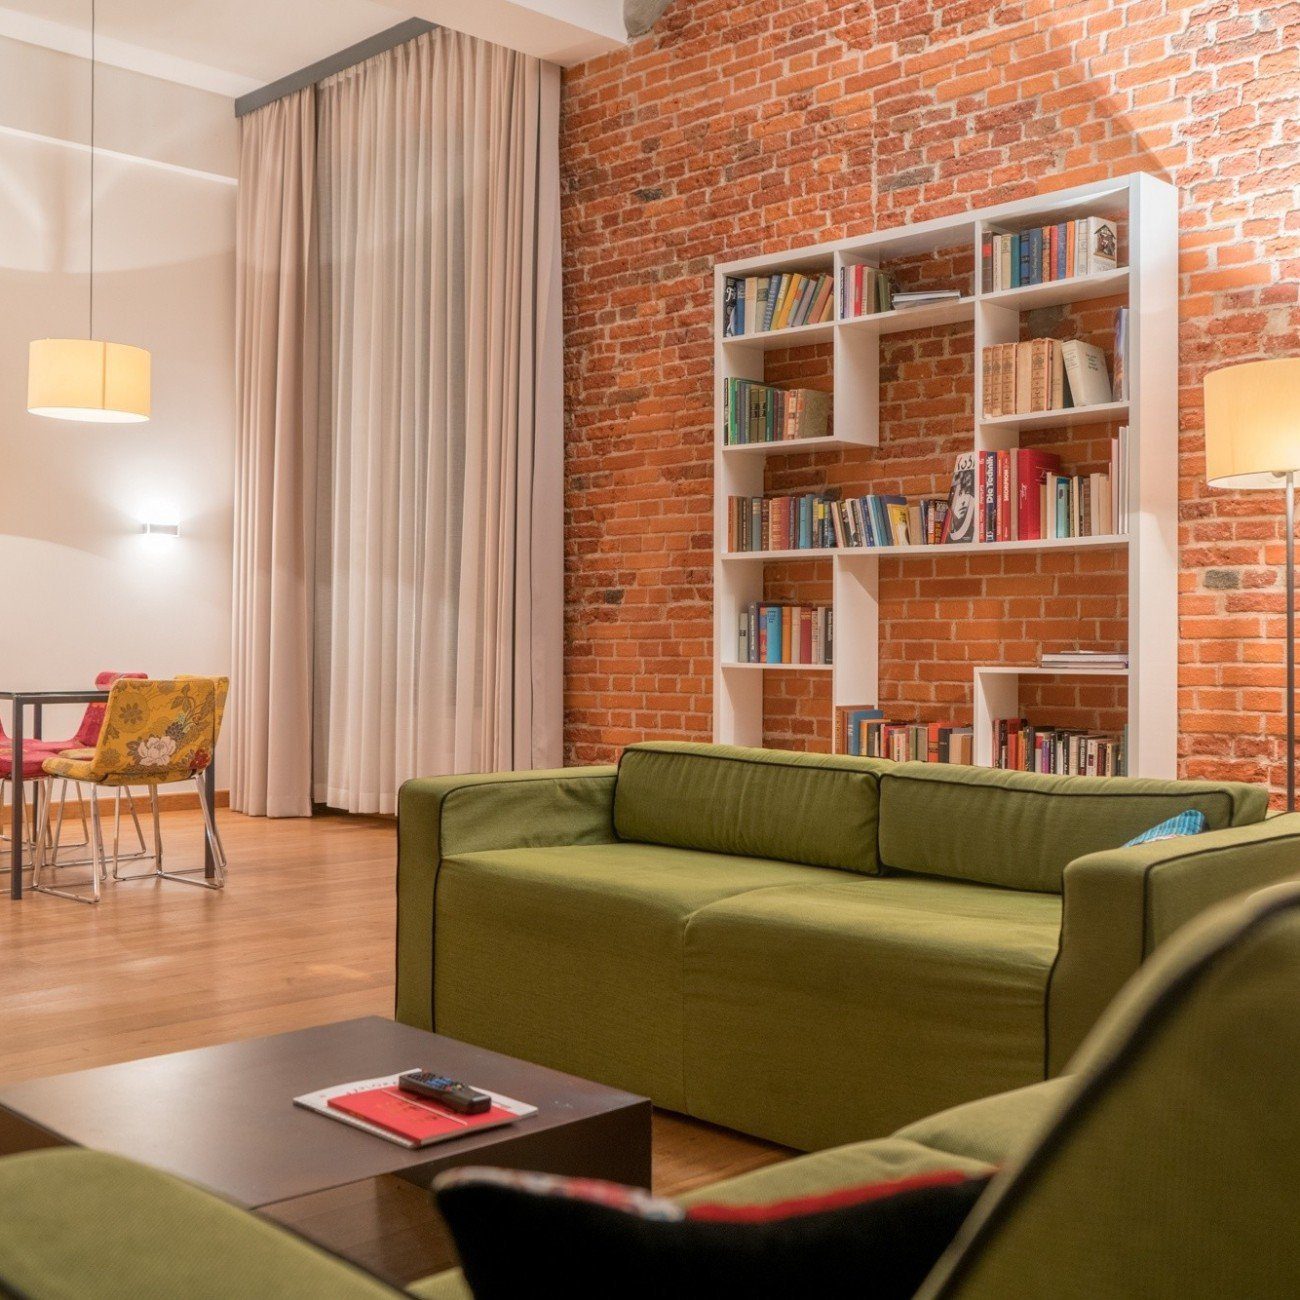 Vienna House Andel's Lodz: upscale hotel in a former textile factory 12